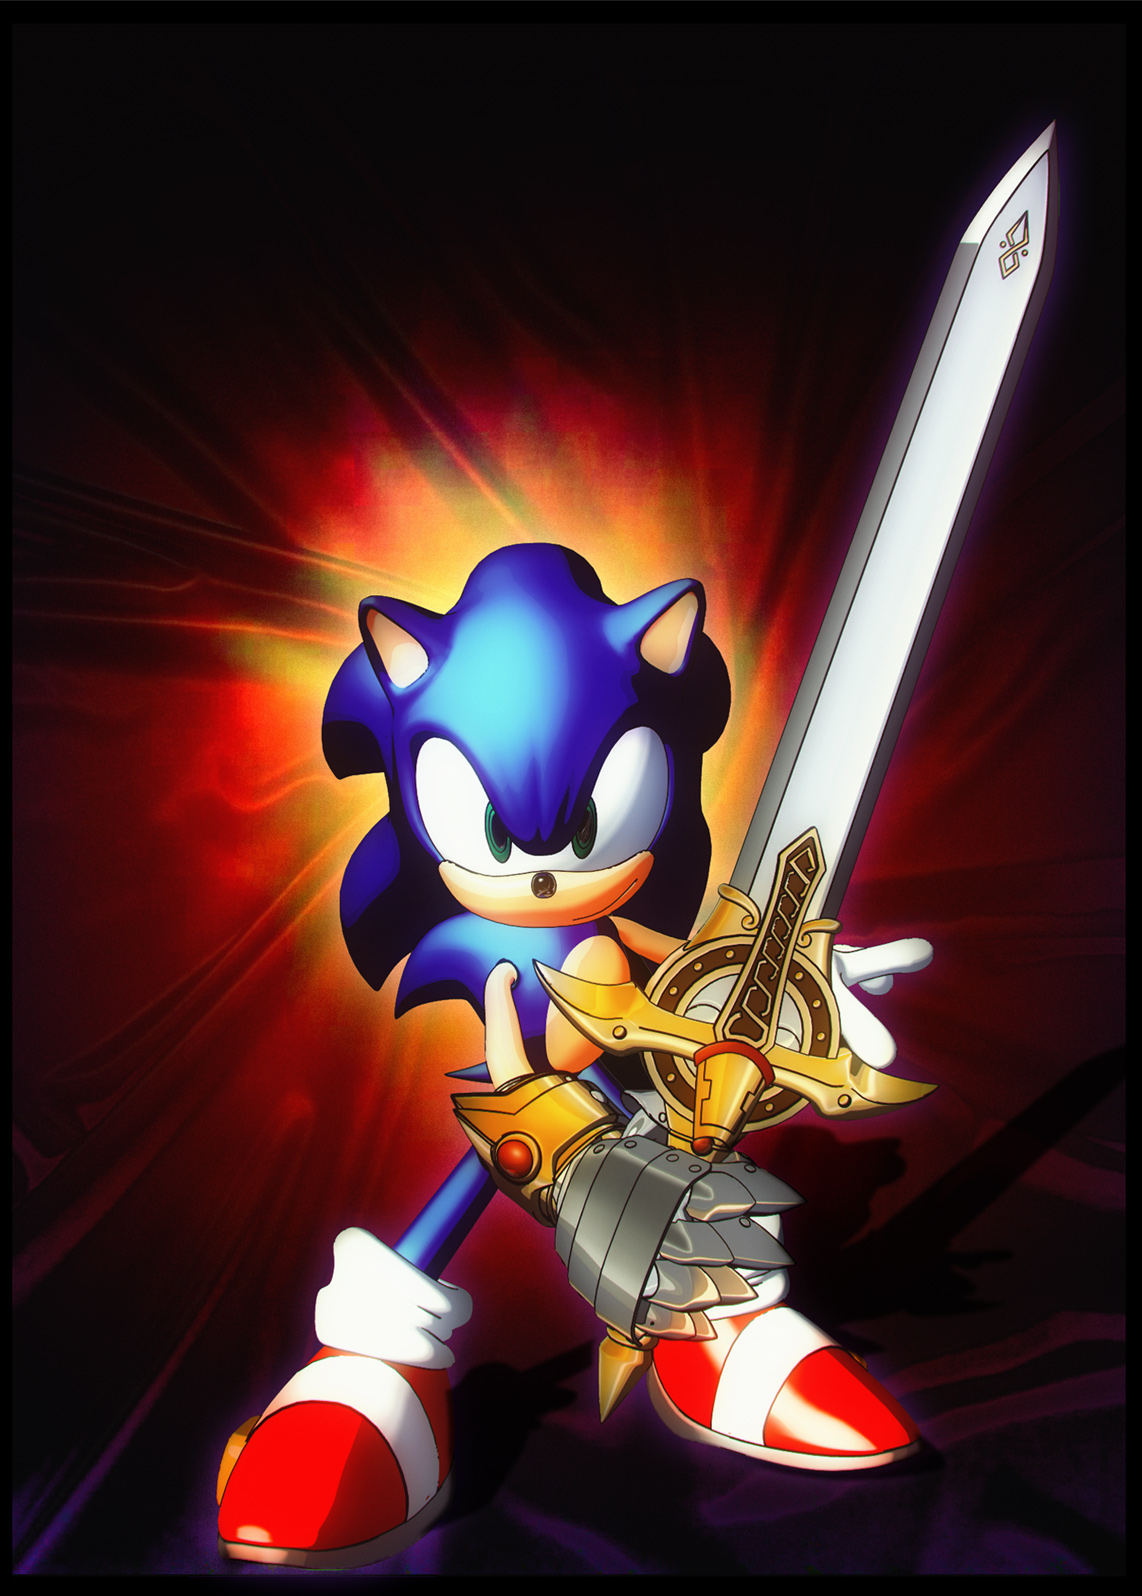 Is One Of My Fav Characters Based On The Sonic And Black Knight